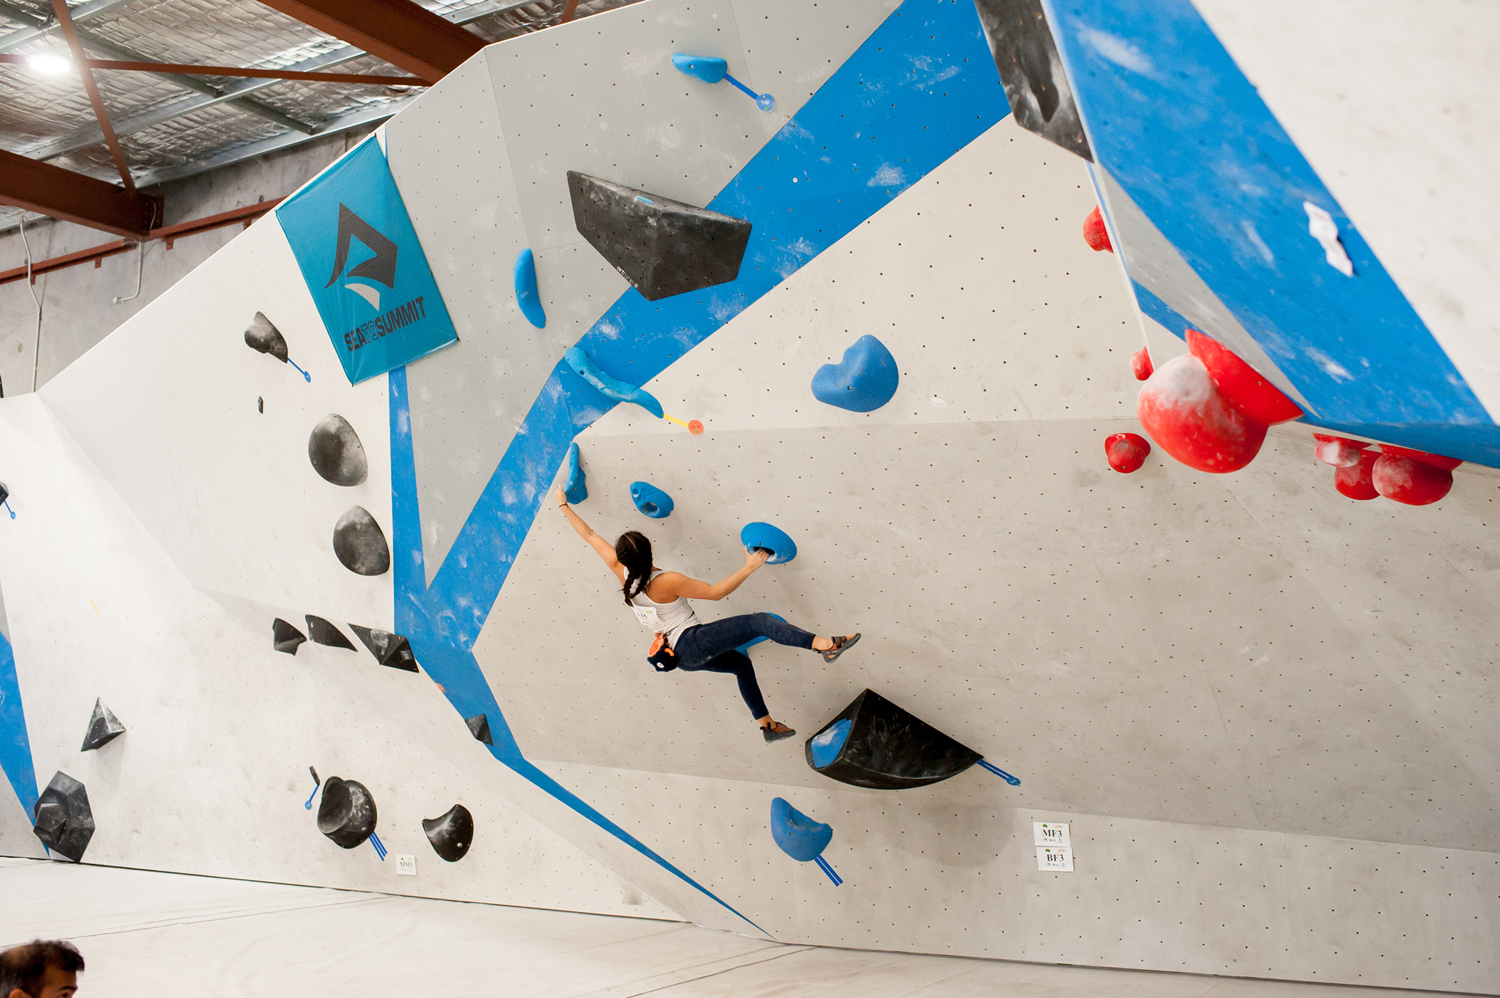 Climbing Rocks Professional Climbing Photography Competition Open Bouldering Championships 2019 (17)